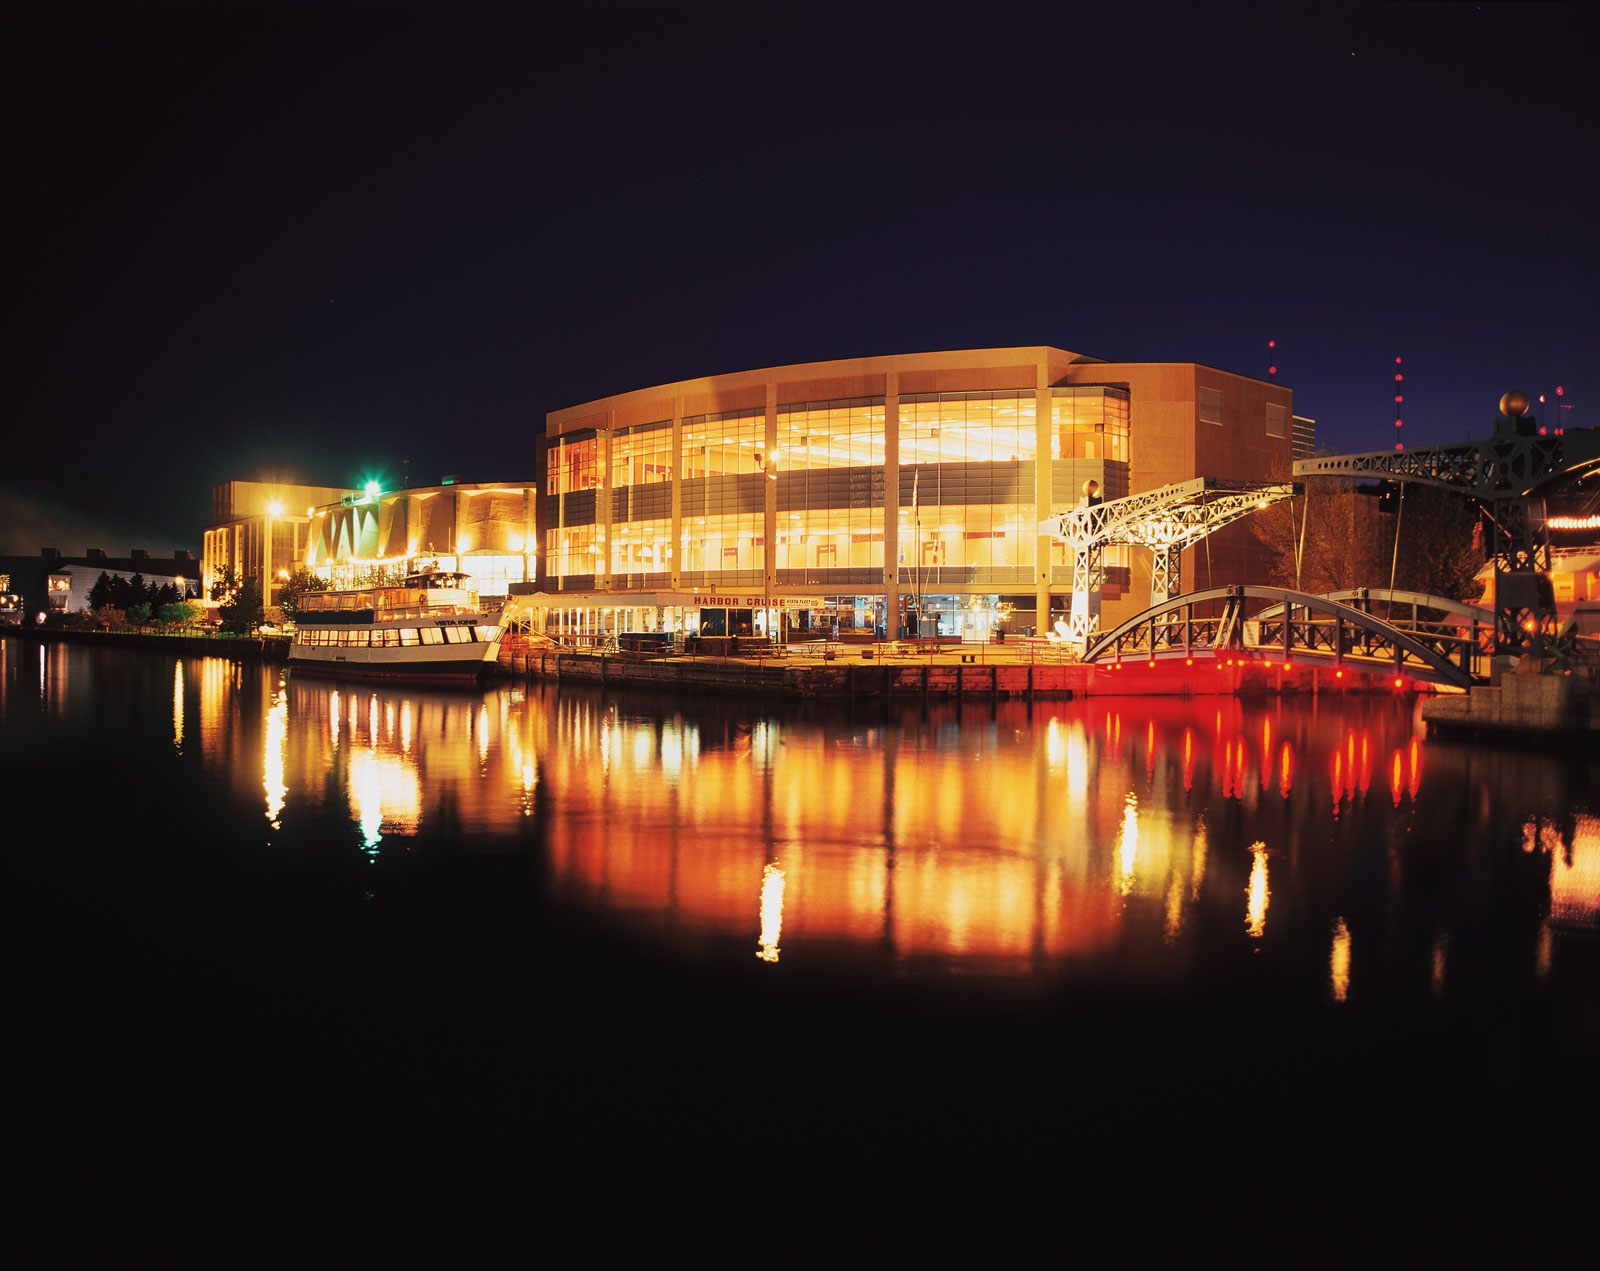 The Duluth Entertainment and Convention Center at night. It's lights reflect on the Harbor.